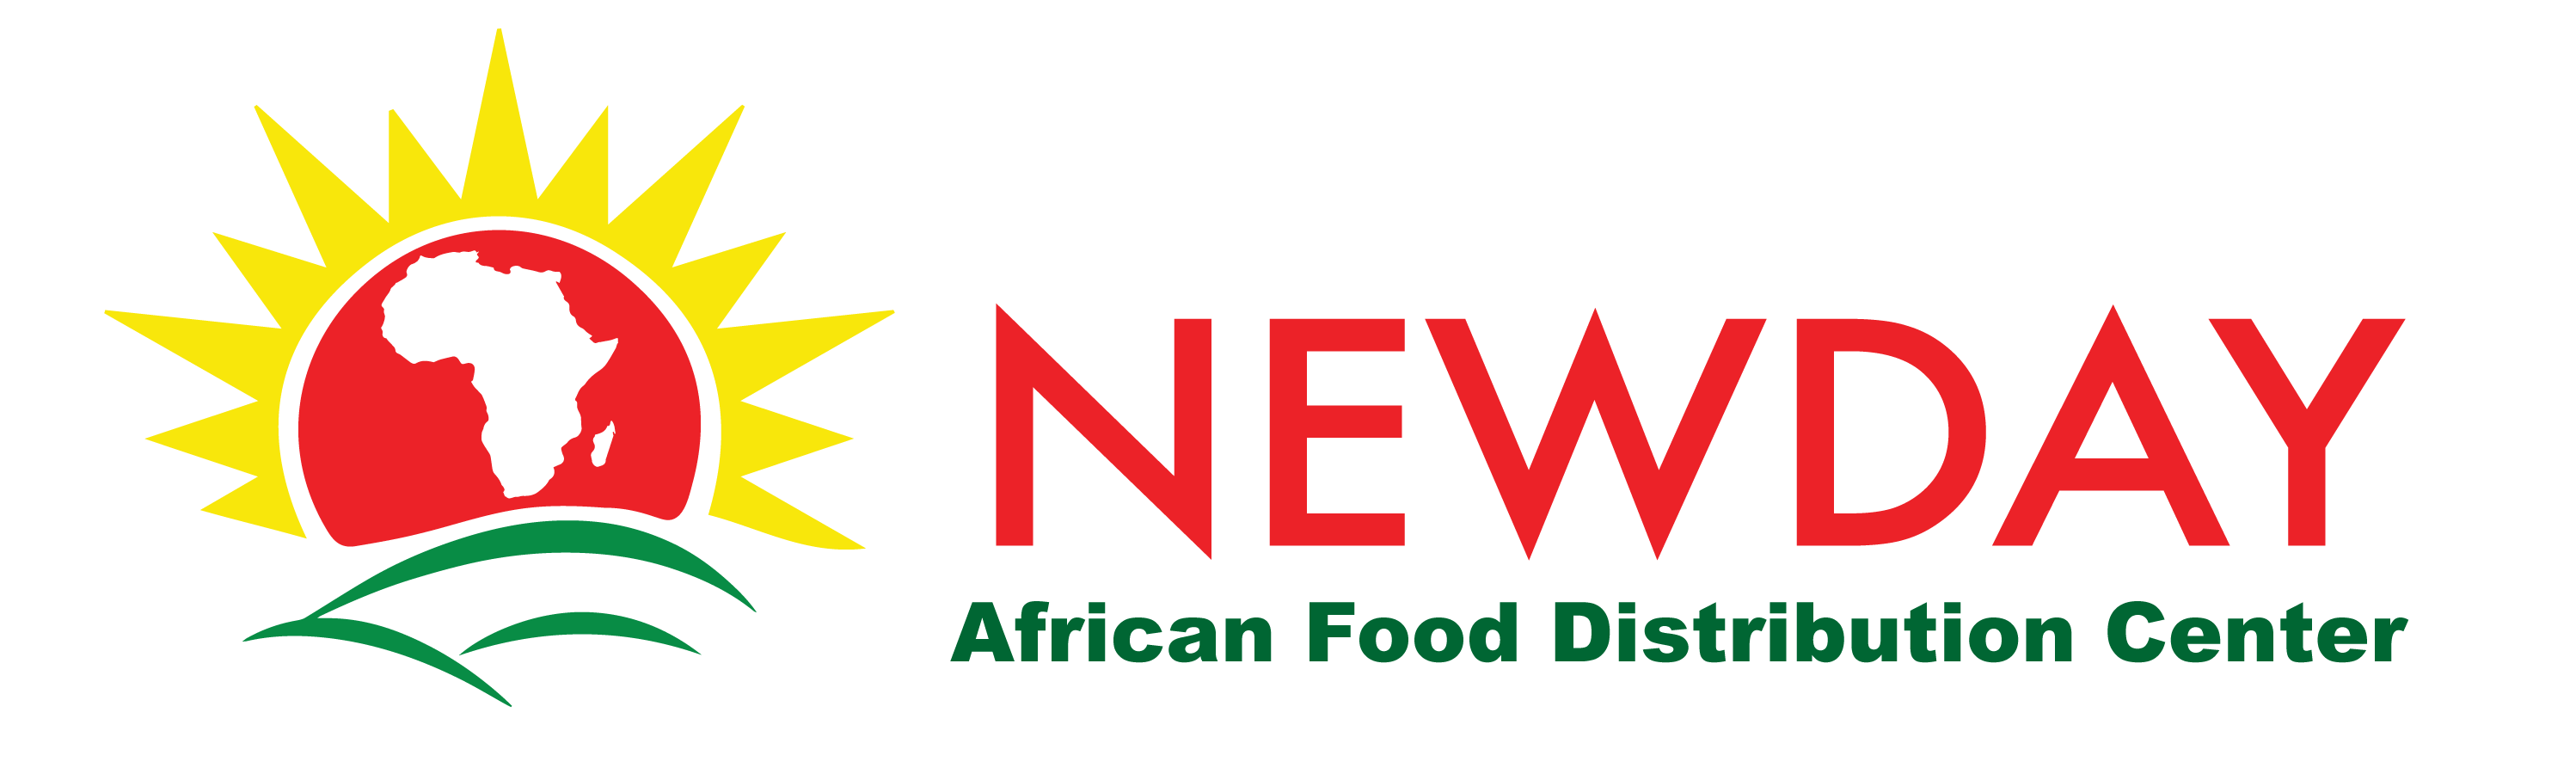 african food distribution center New Day